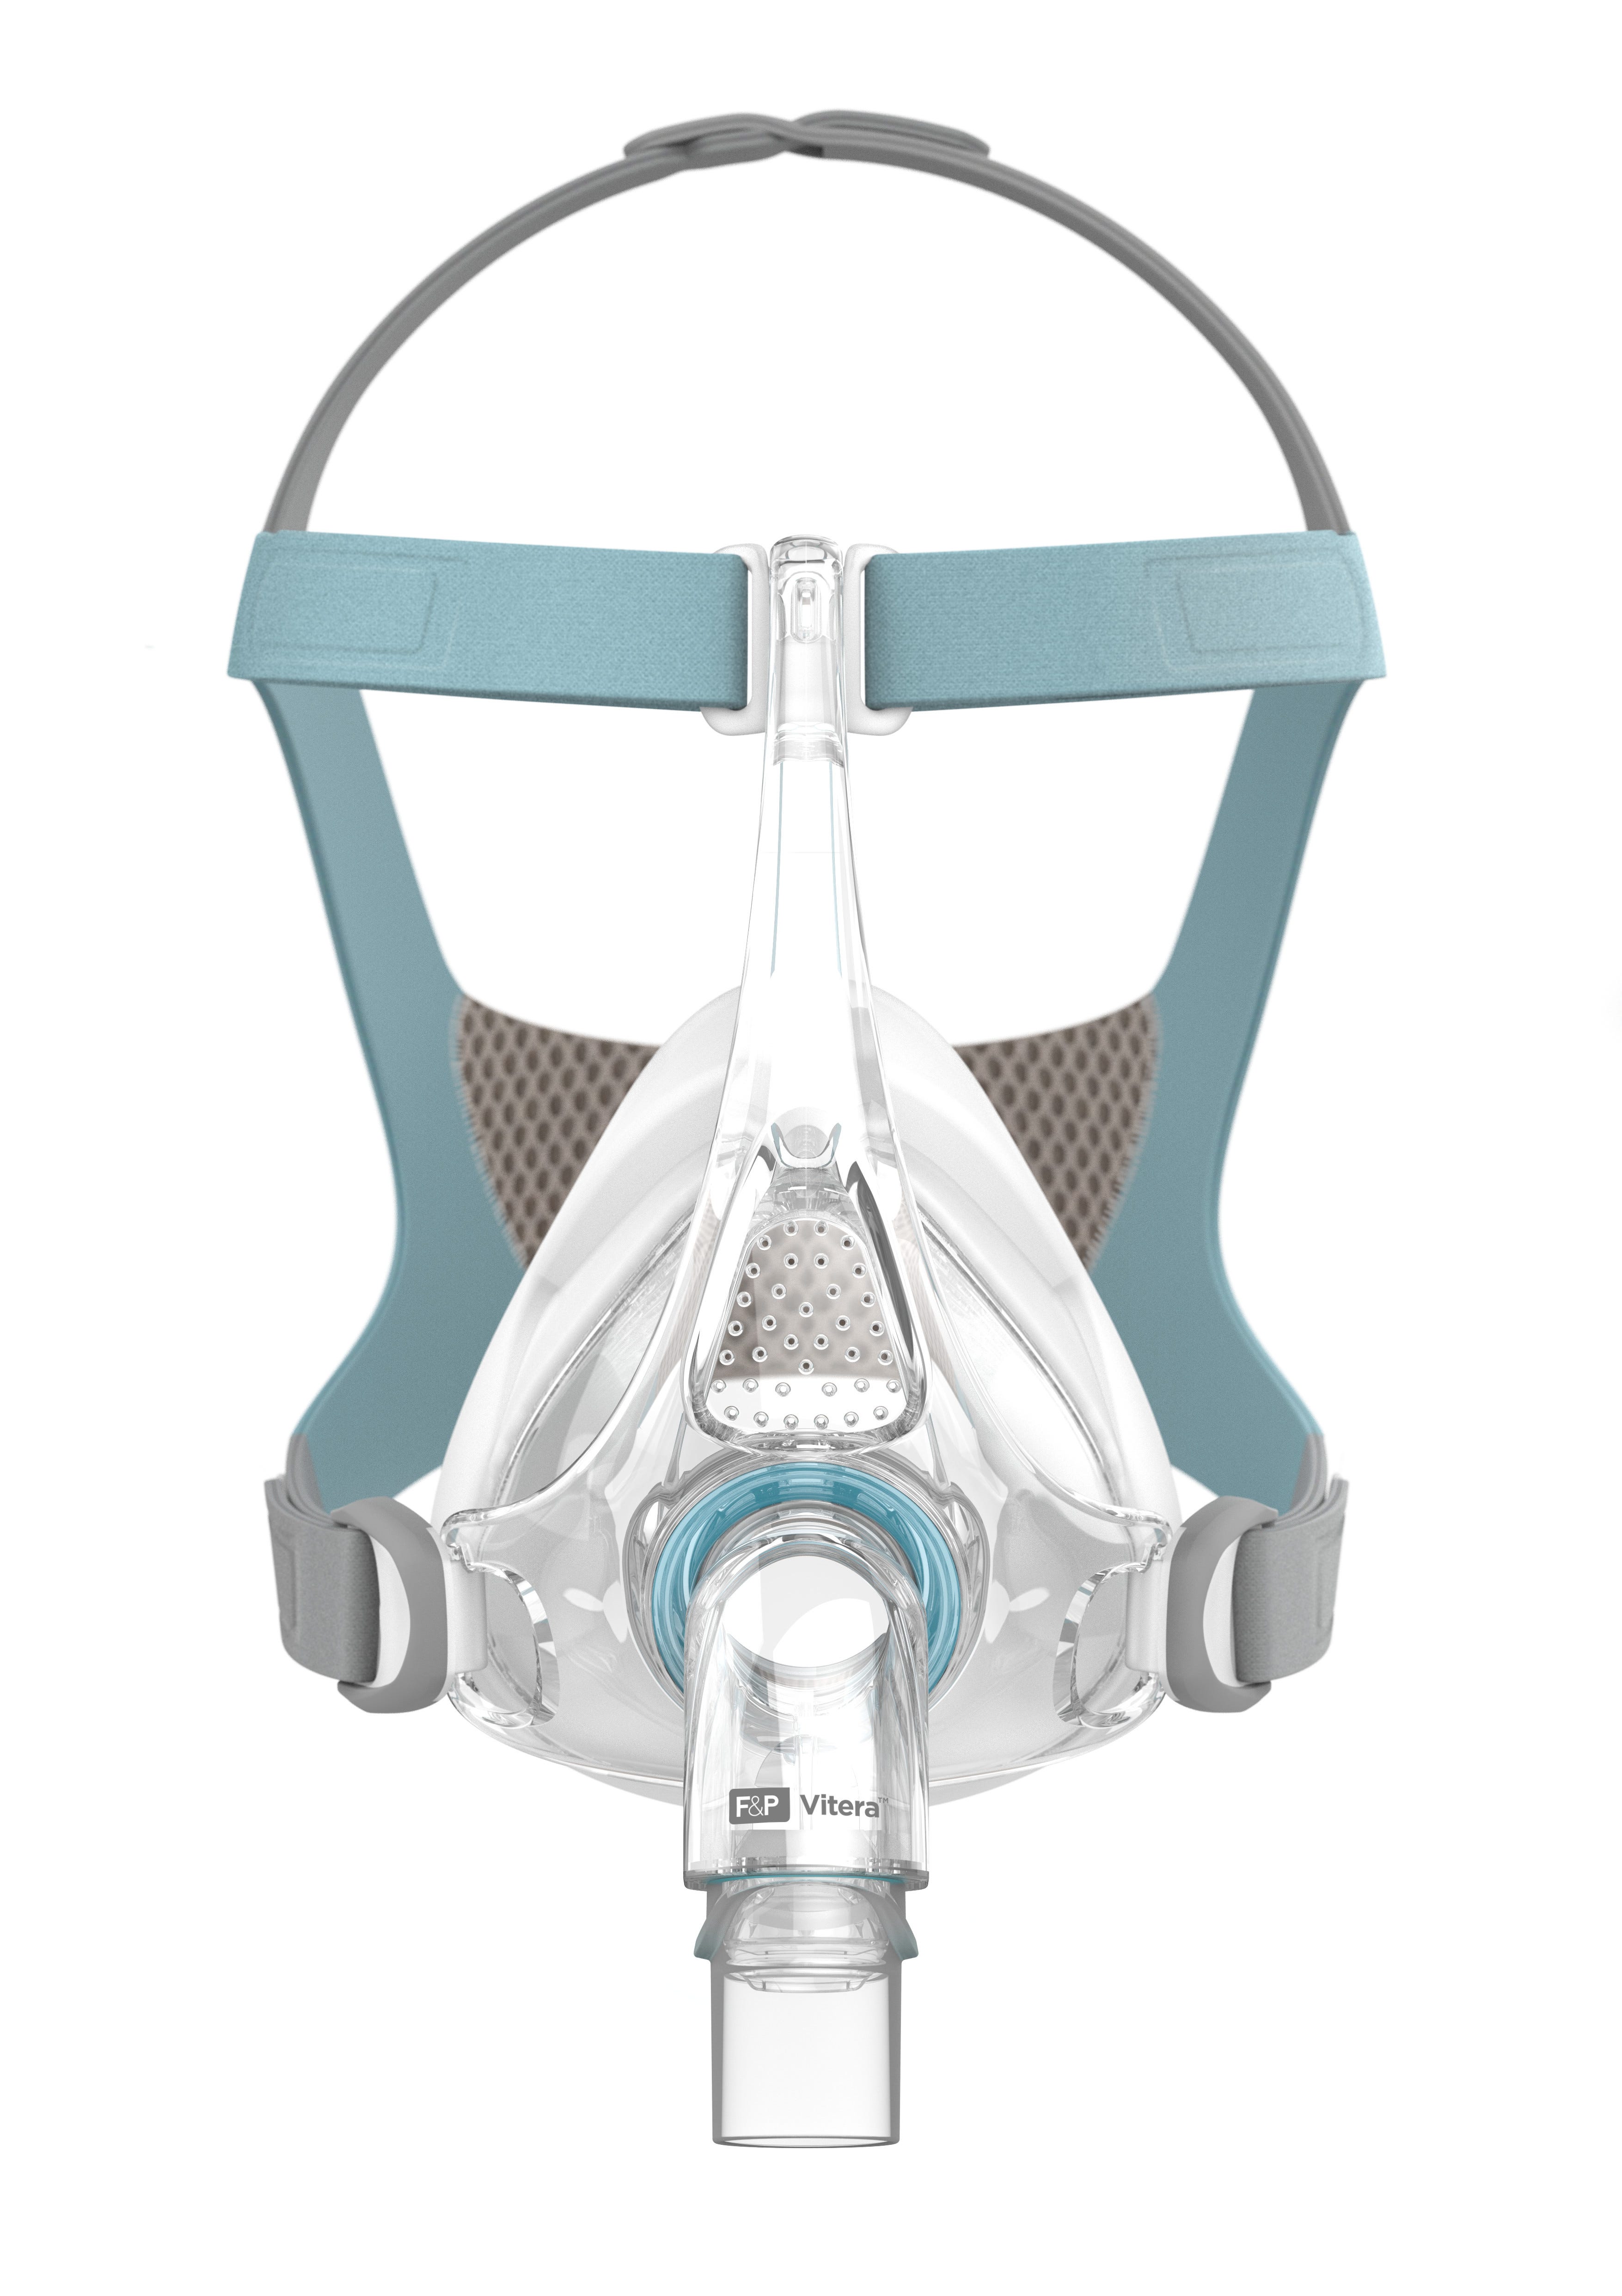 Image of Vitera Full Face CPAP Mask Fitpack by Fisher & Paykel